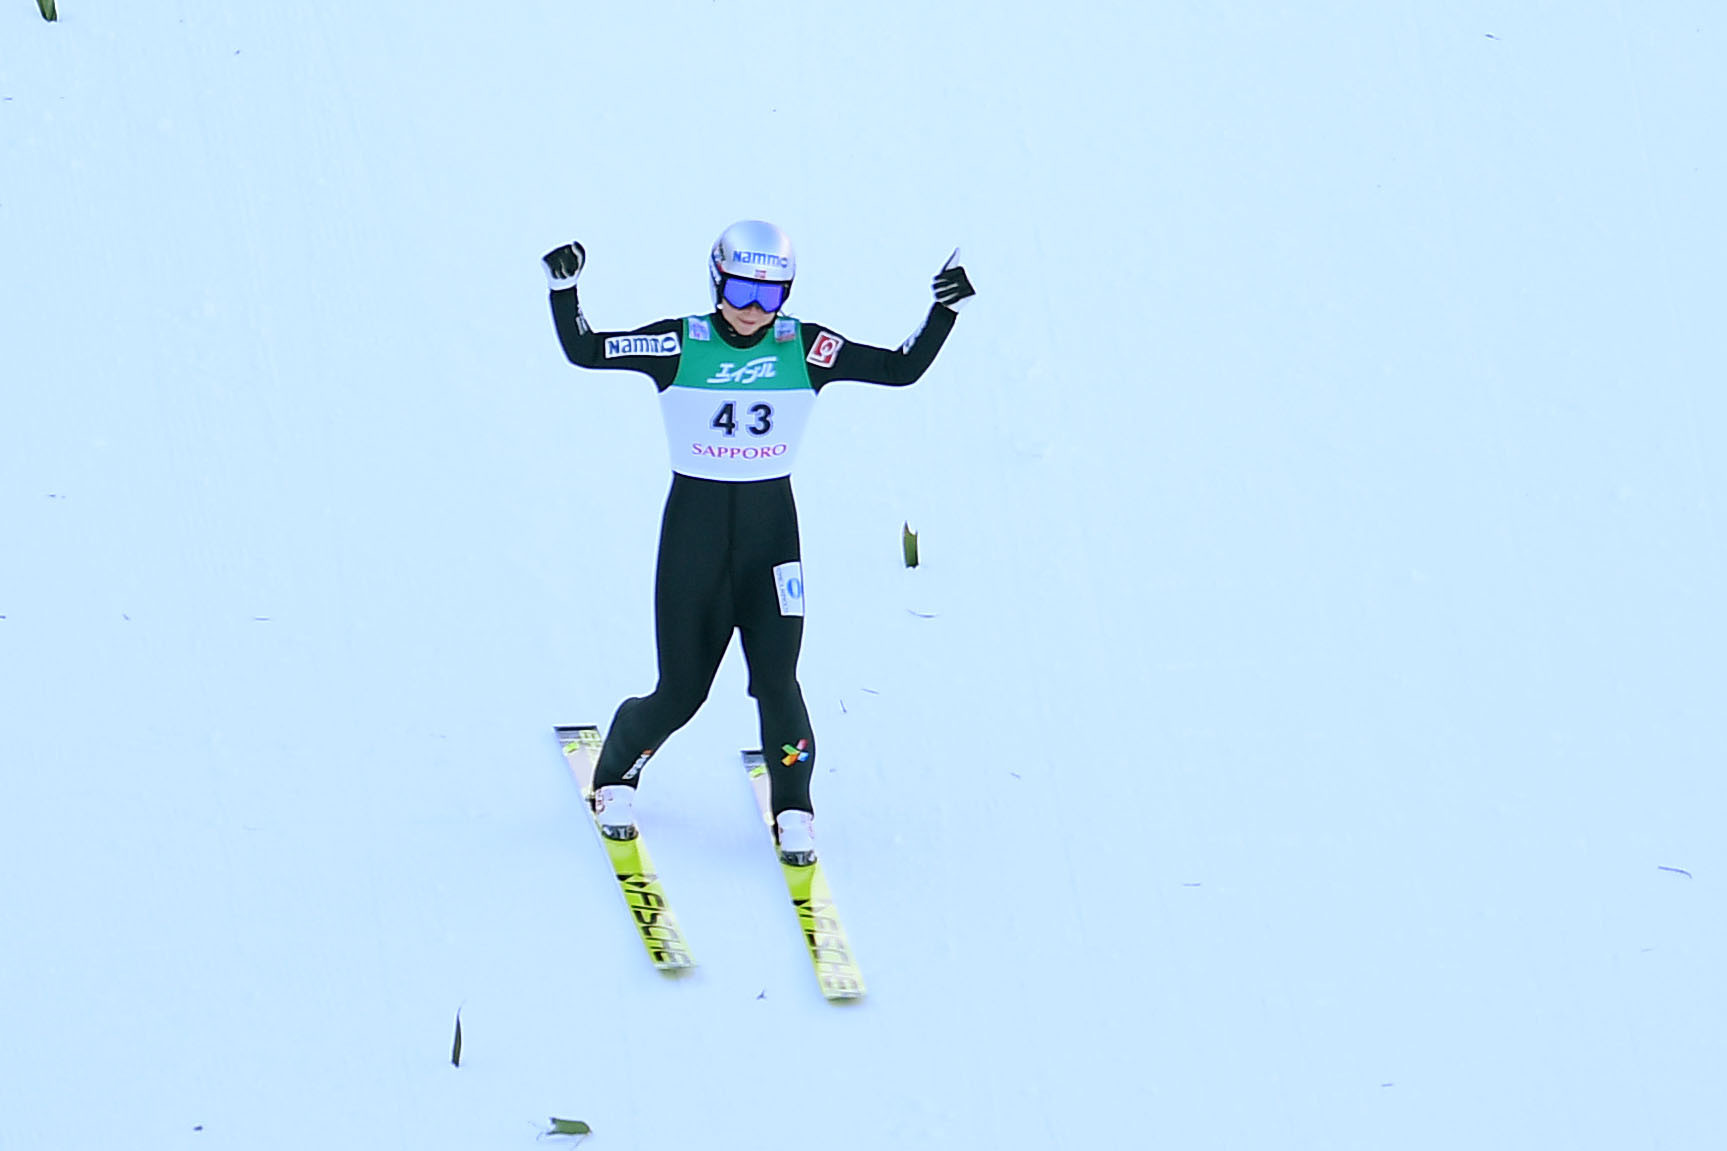 Lundby claims fourth successive win to move further ahead in Ski Jumping World Cup 